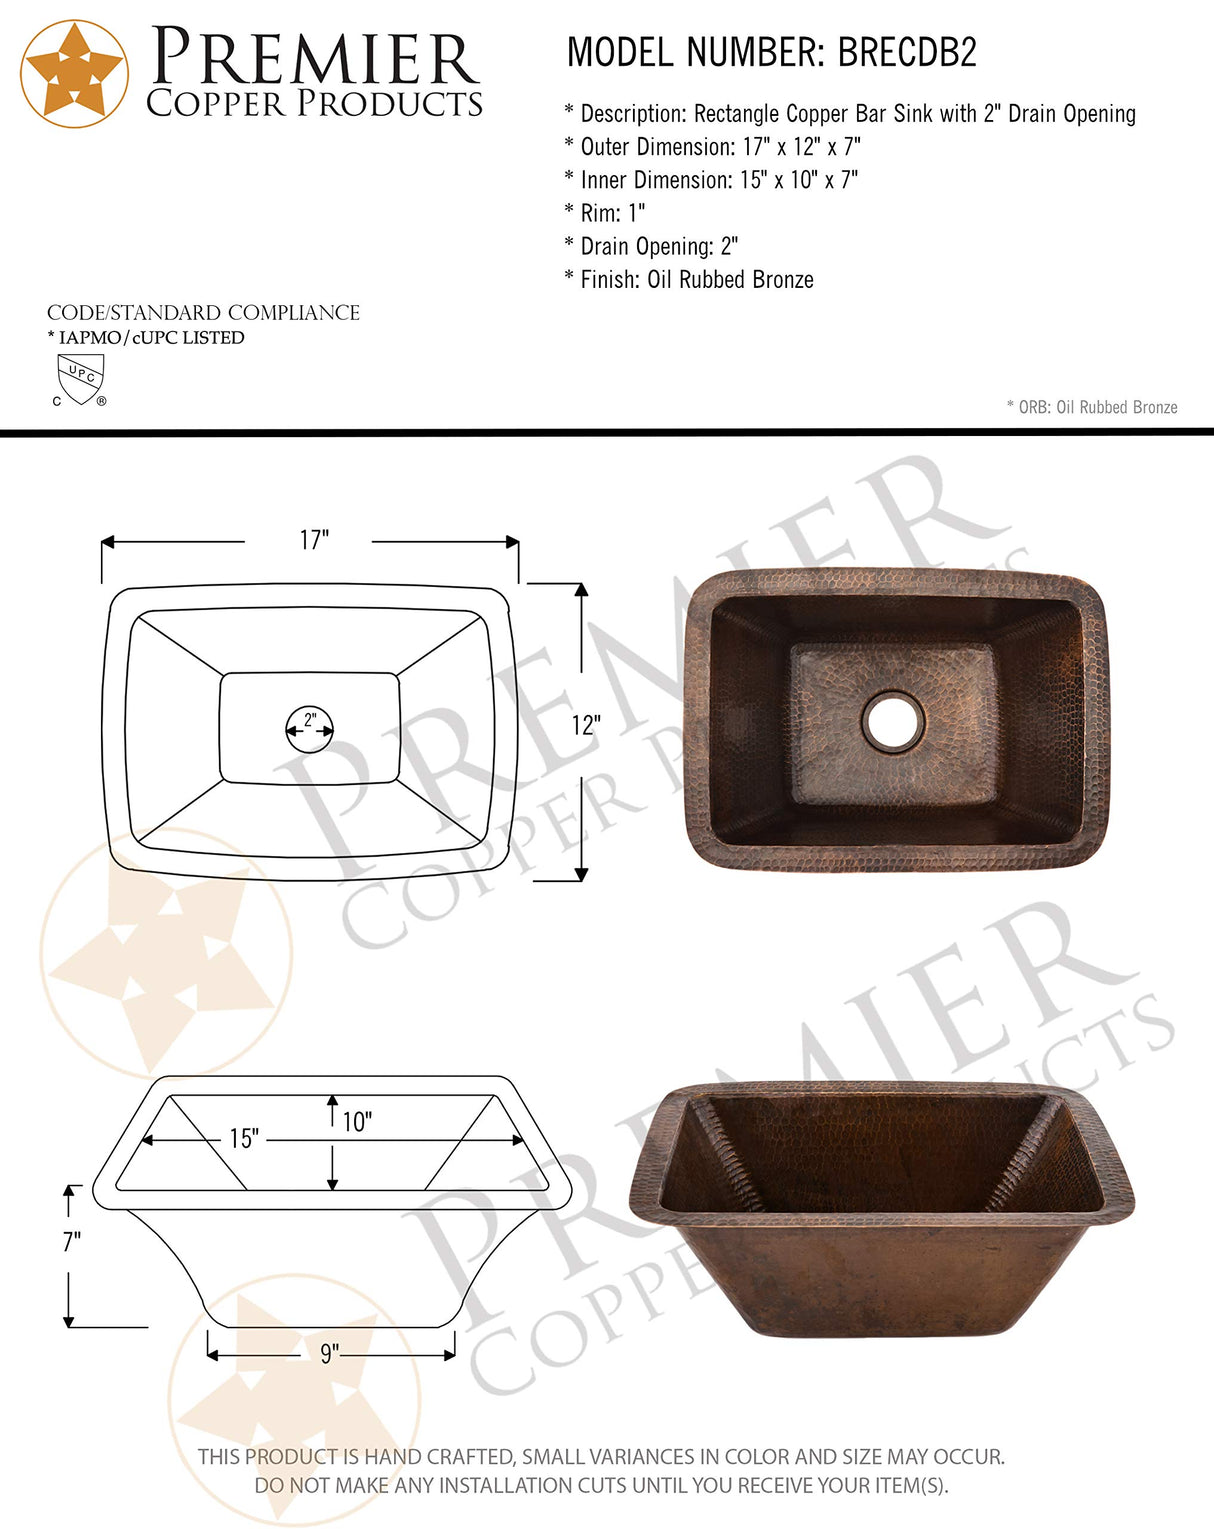 Premier Copper Products BRECDB2 17-Inch Rectangle Copper Bar Sink with 2-Inch Drain Size, Oil Rubbed Bronze